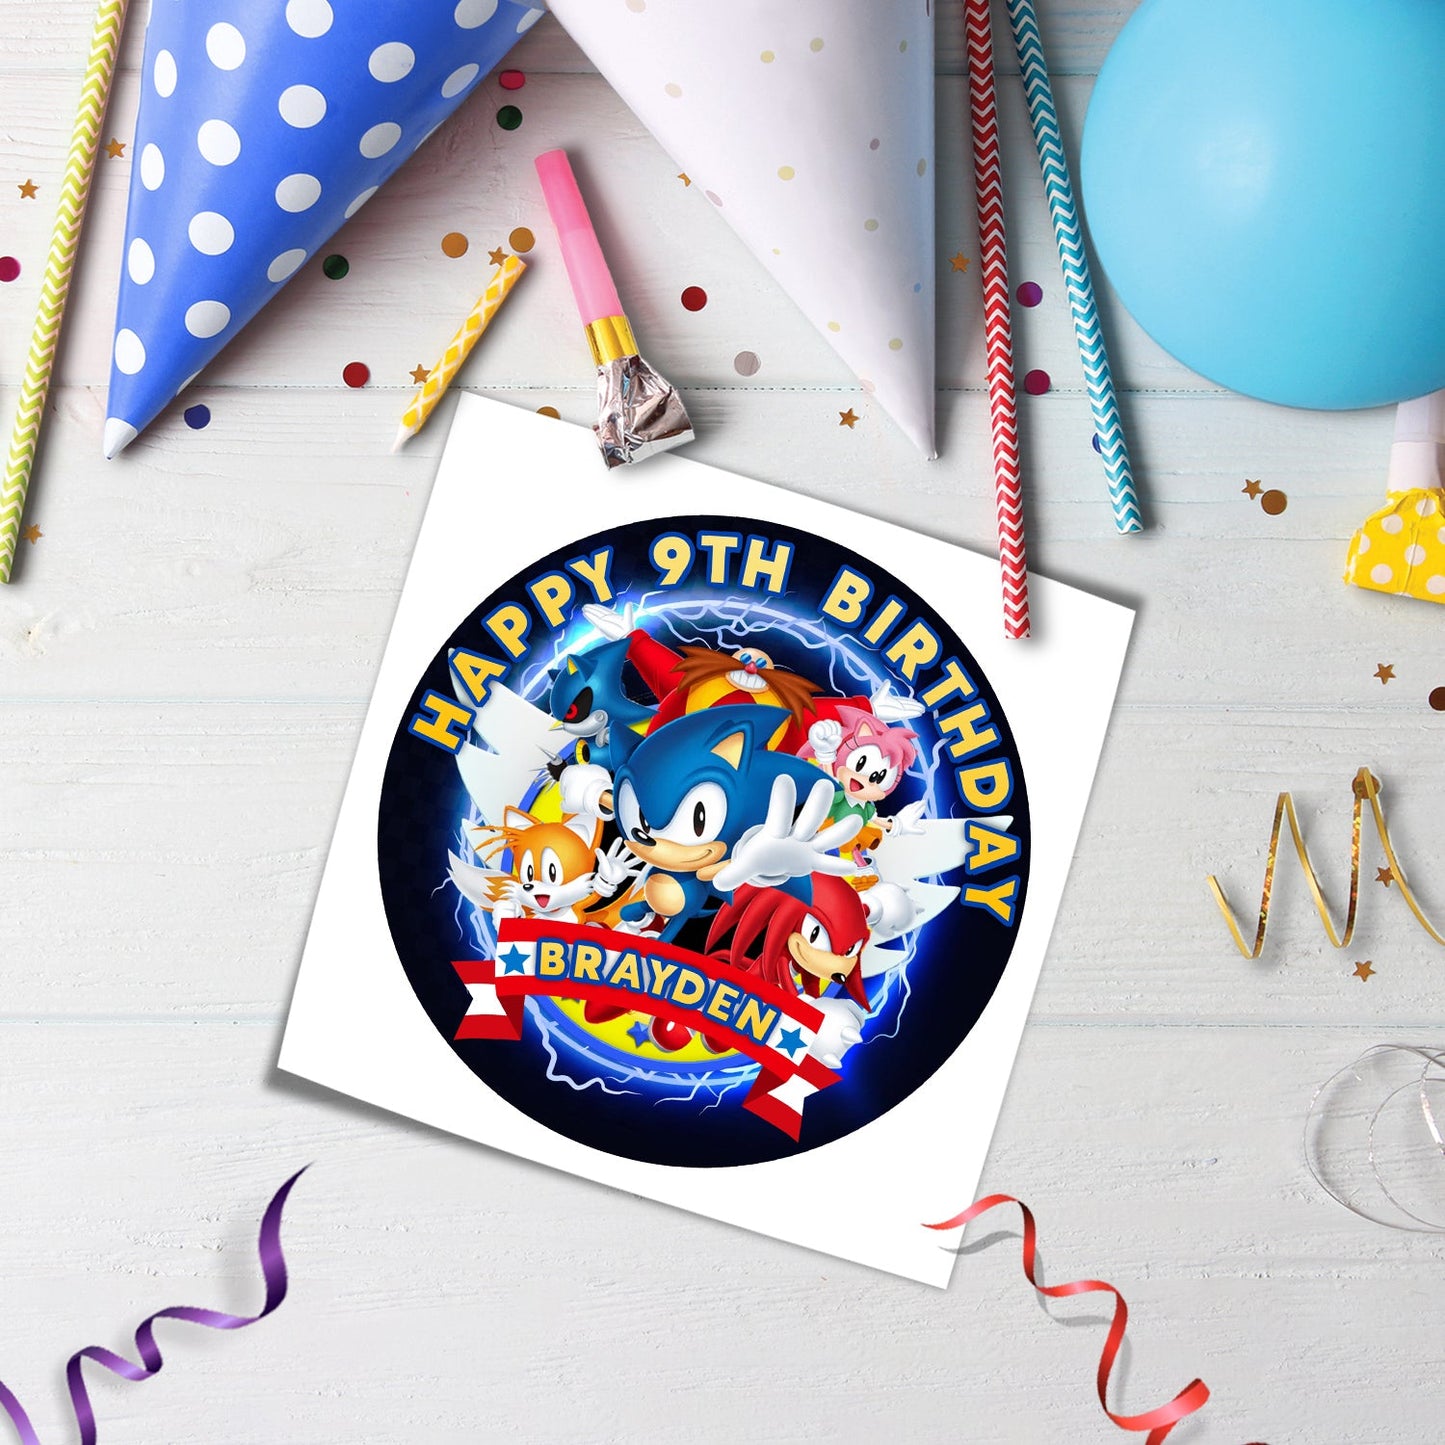 Make Your Cake Stand Out with Sonic The Hedgehog Personalized Round Cake Images